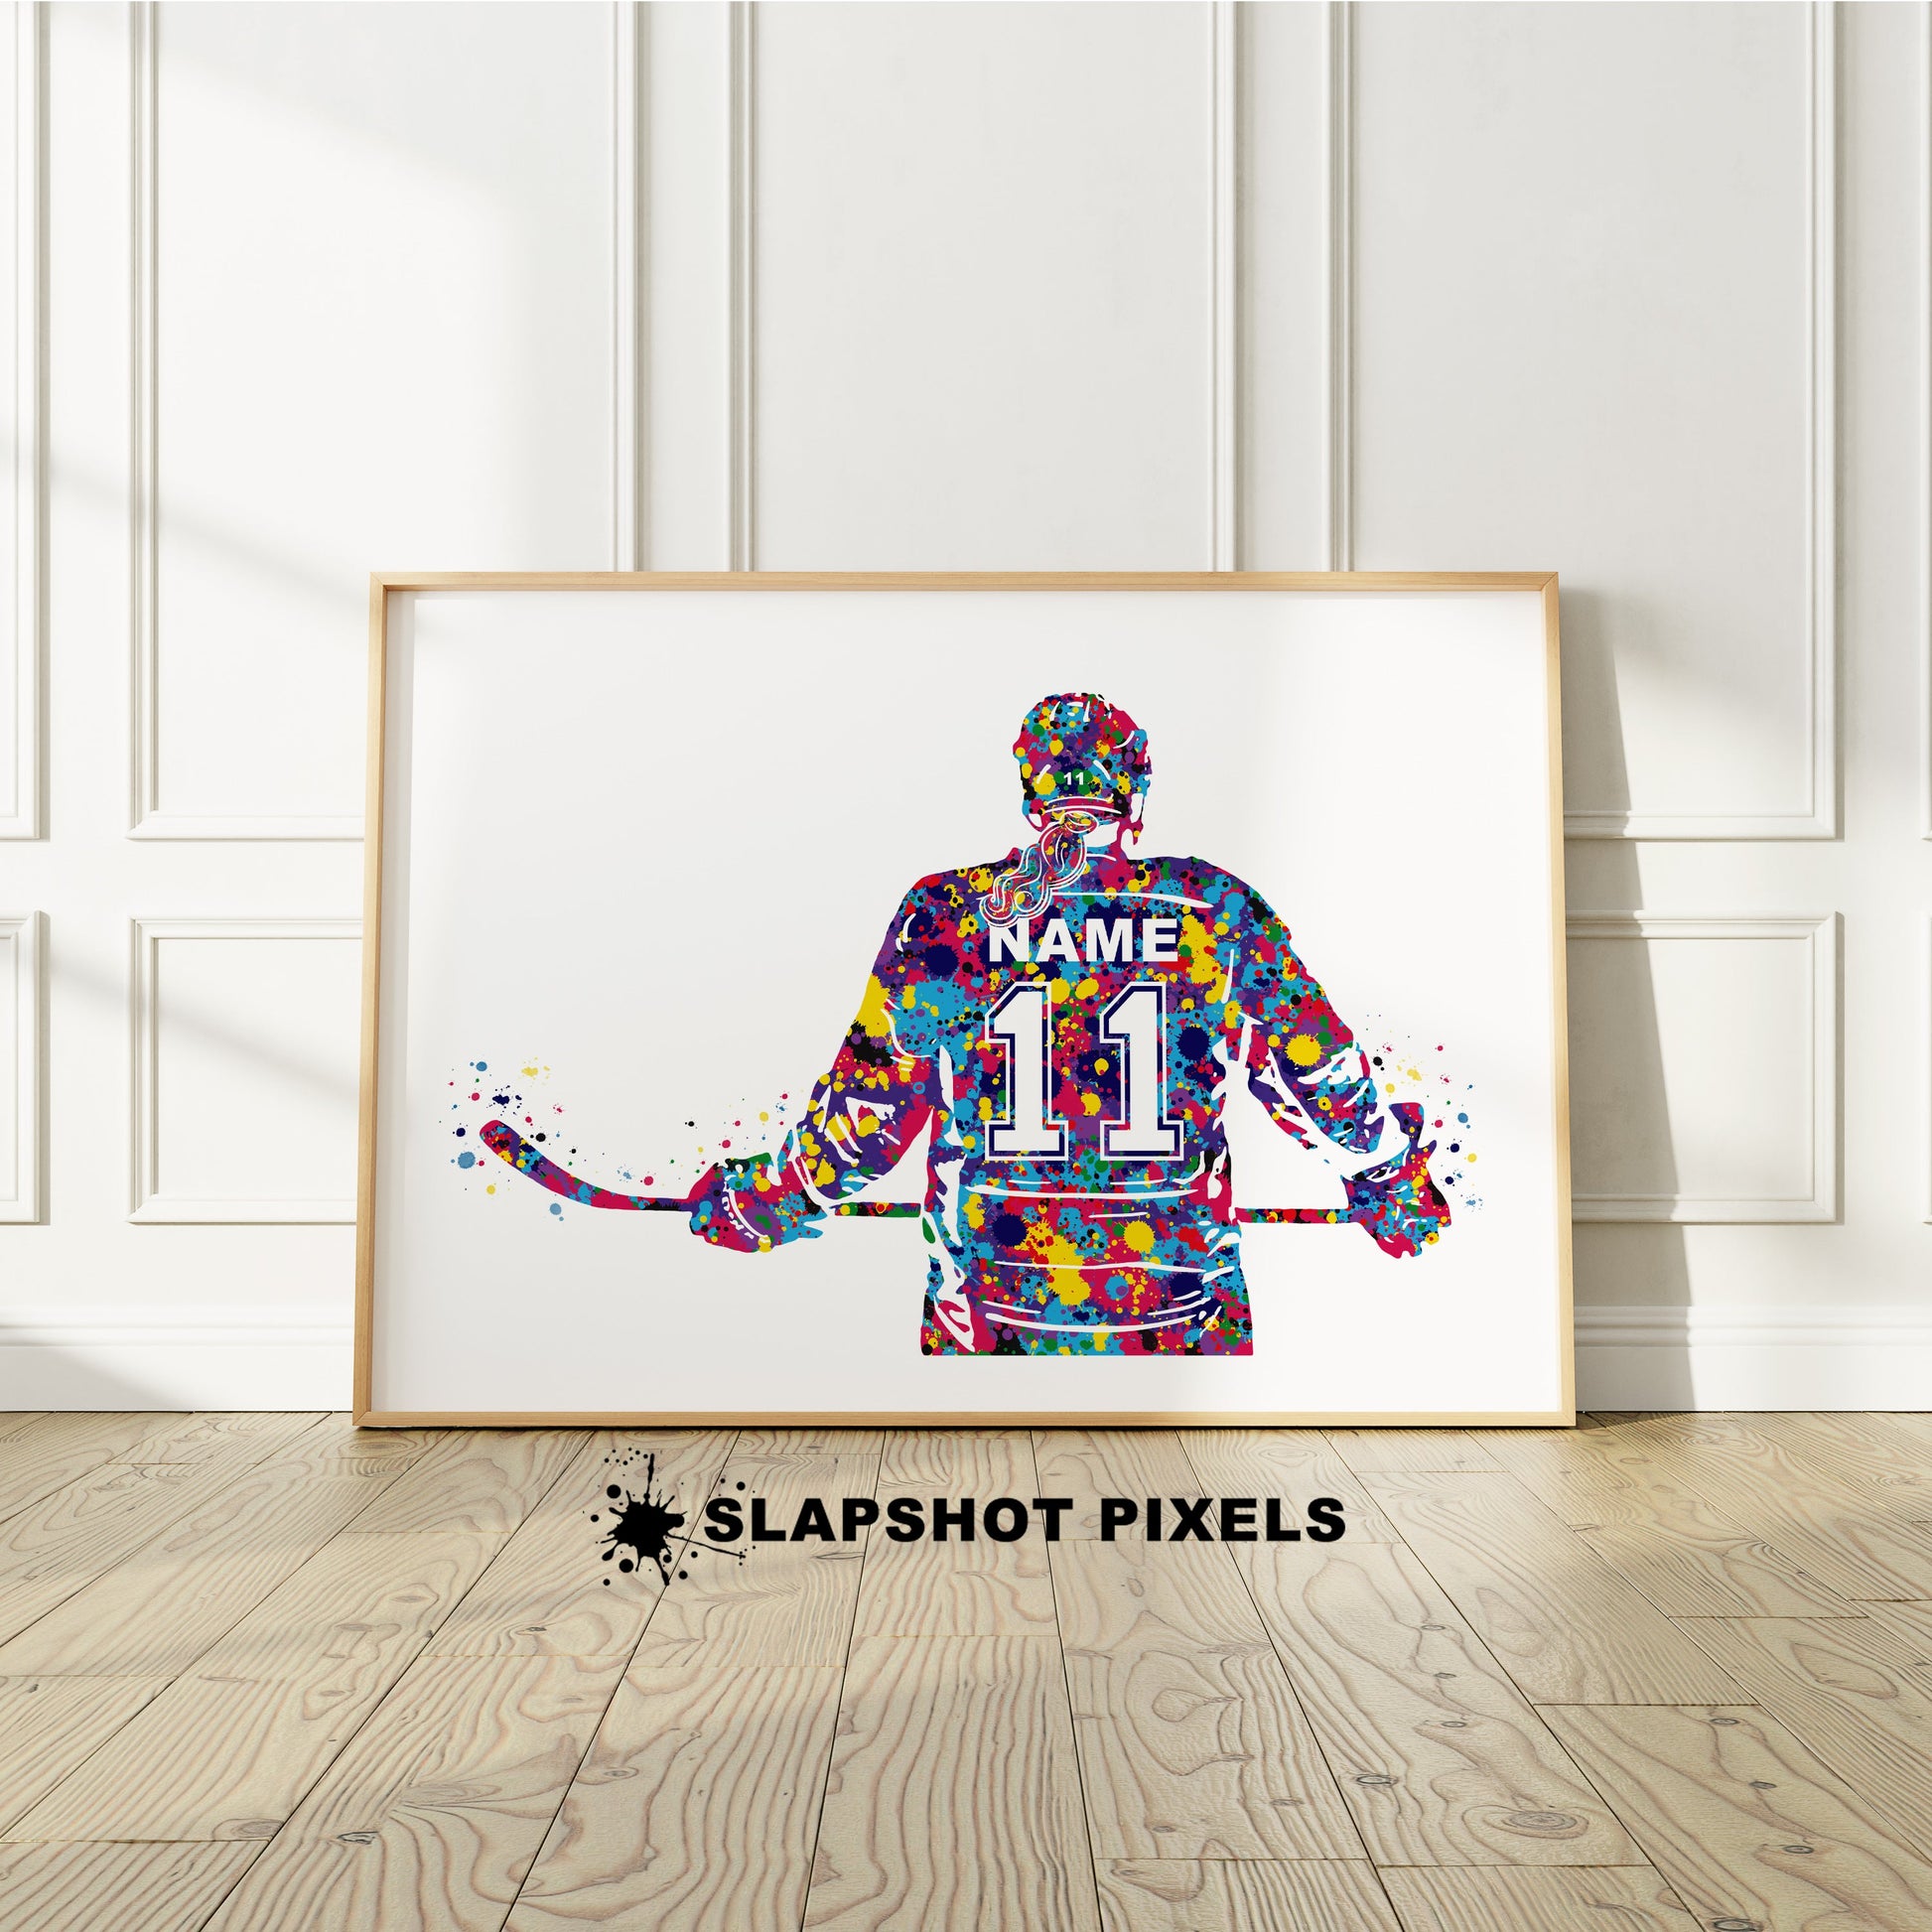 Personalized hockey poster showing back of a girl hockey player with custom name and number on the hockey jersey. Designed in watercolor splatters. Perfect hockey gifts for girls, hockey team gifts, hockey coach gift, hockey wall art décor in a hockey bedroom and birthday gifts for hockey players.